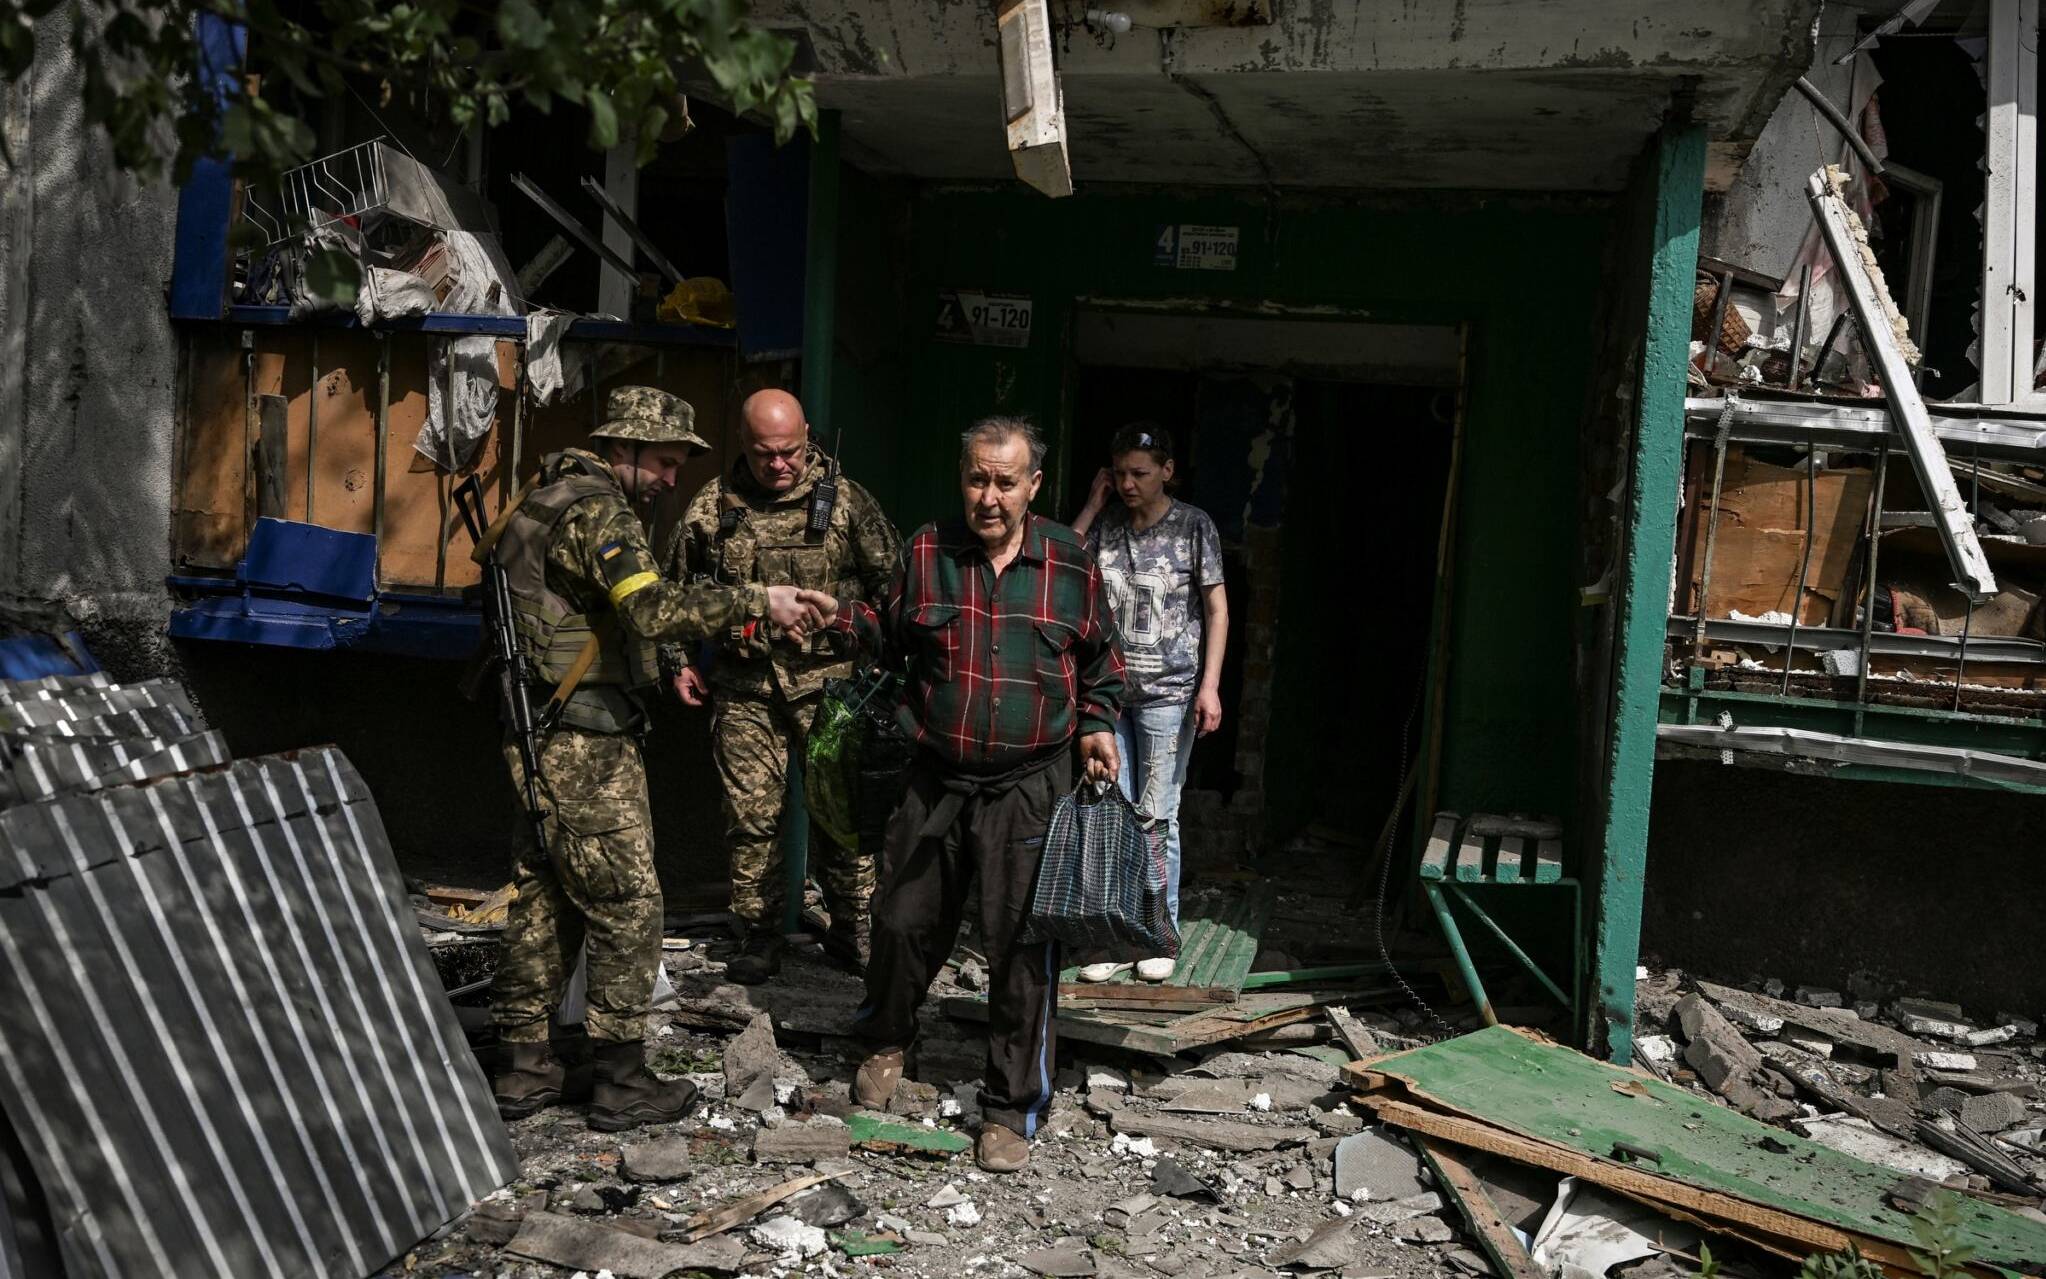 Ukrainian servicemen help an elderly man to walk out of a damaged appartment building after a strike in the city of Slovyansk at the eastern Ukrainian region of Donbas on May 31, 2022, amid Russian invasion of Ukraine. (Photo by ARIS MESSINIS / AFP)